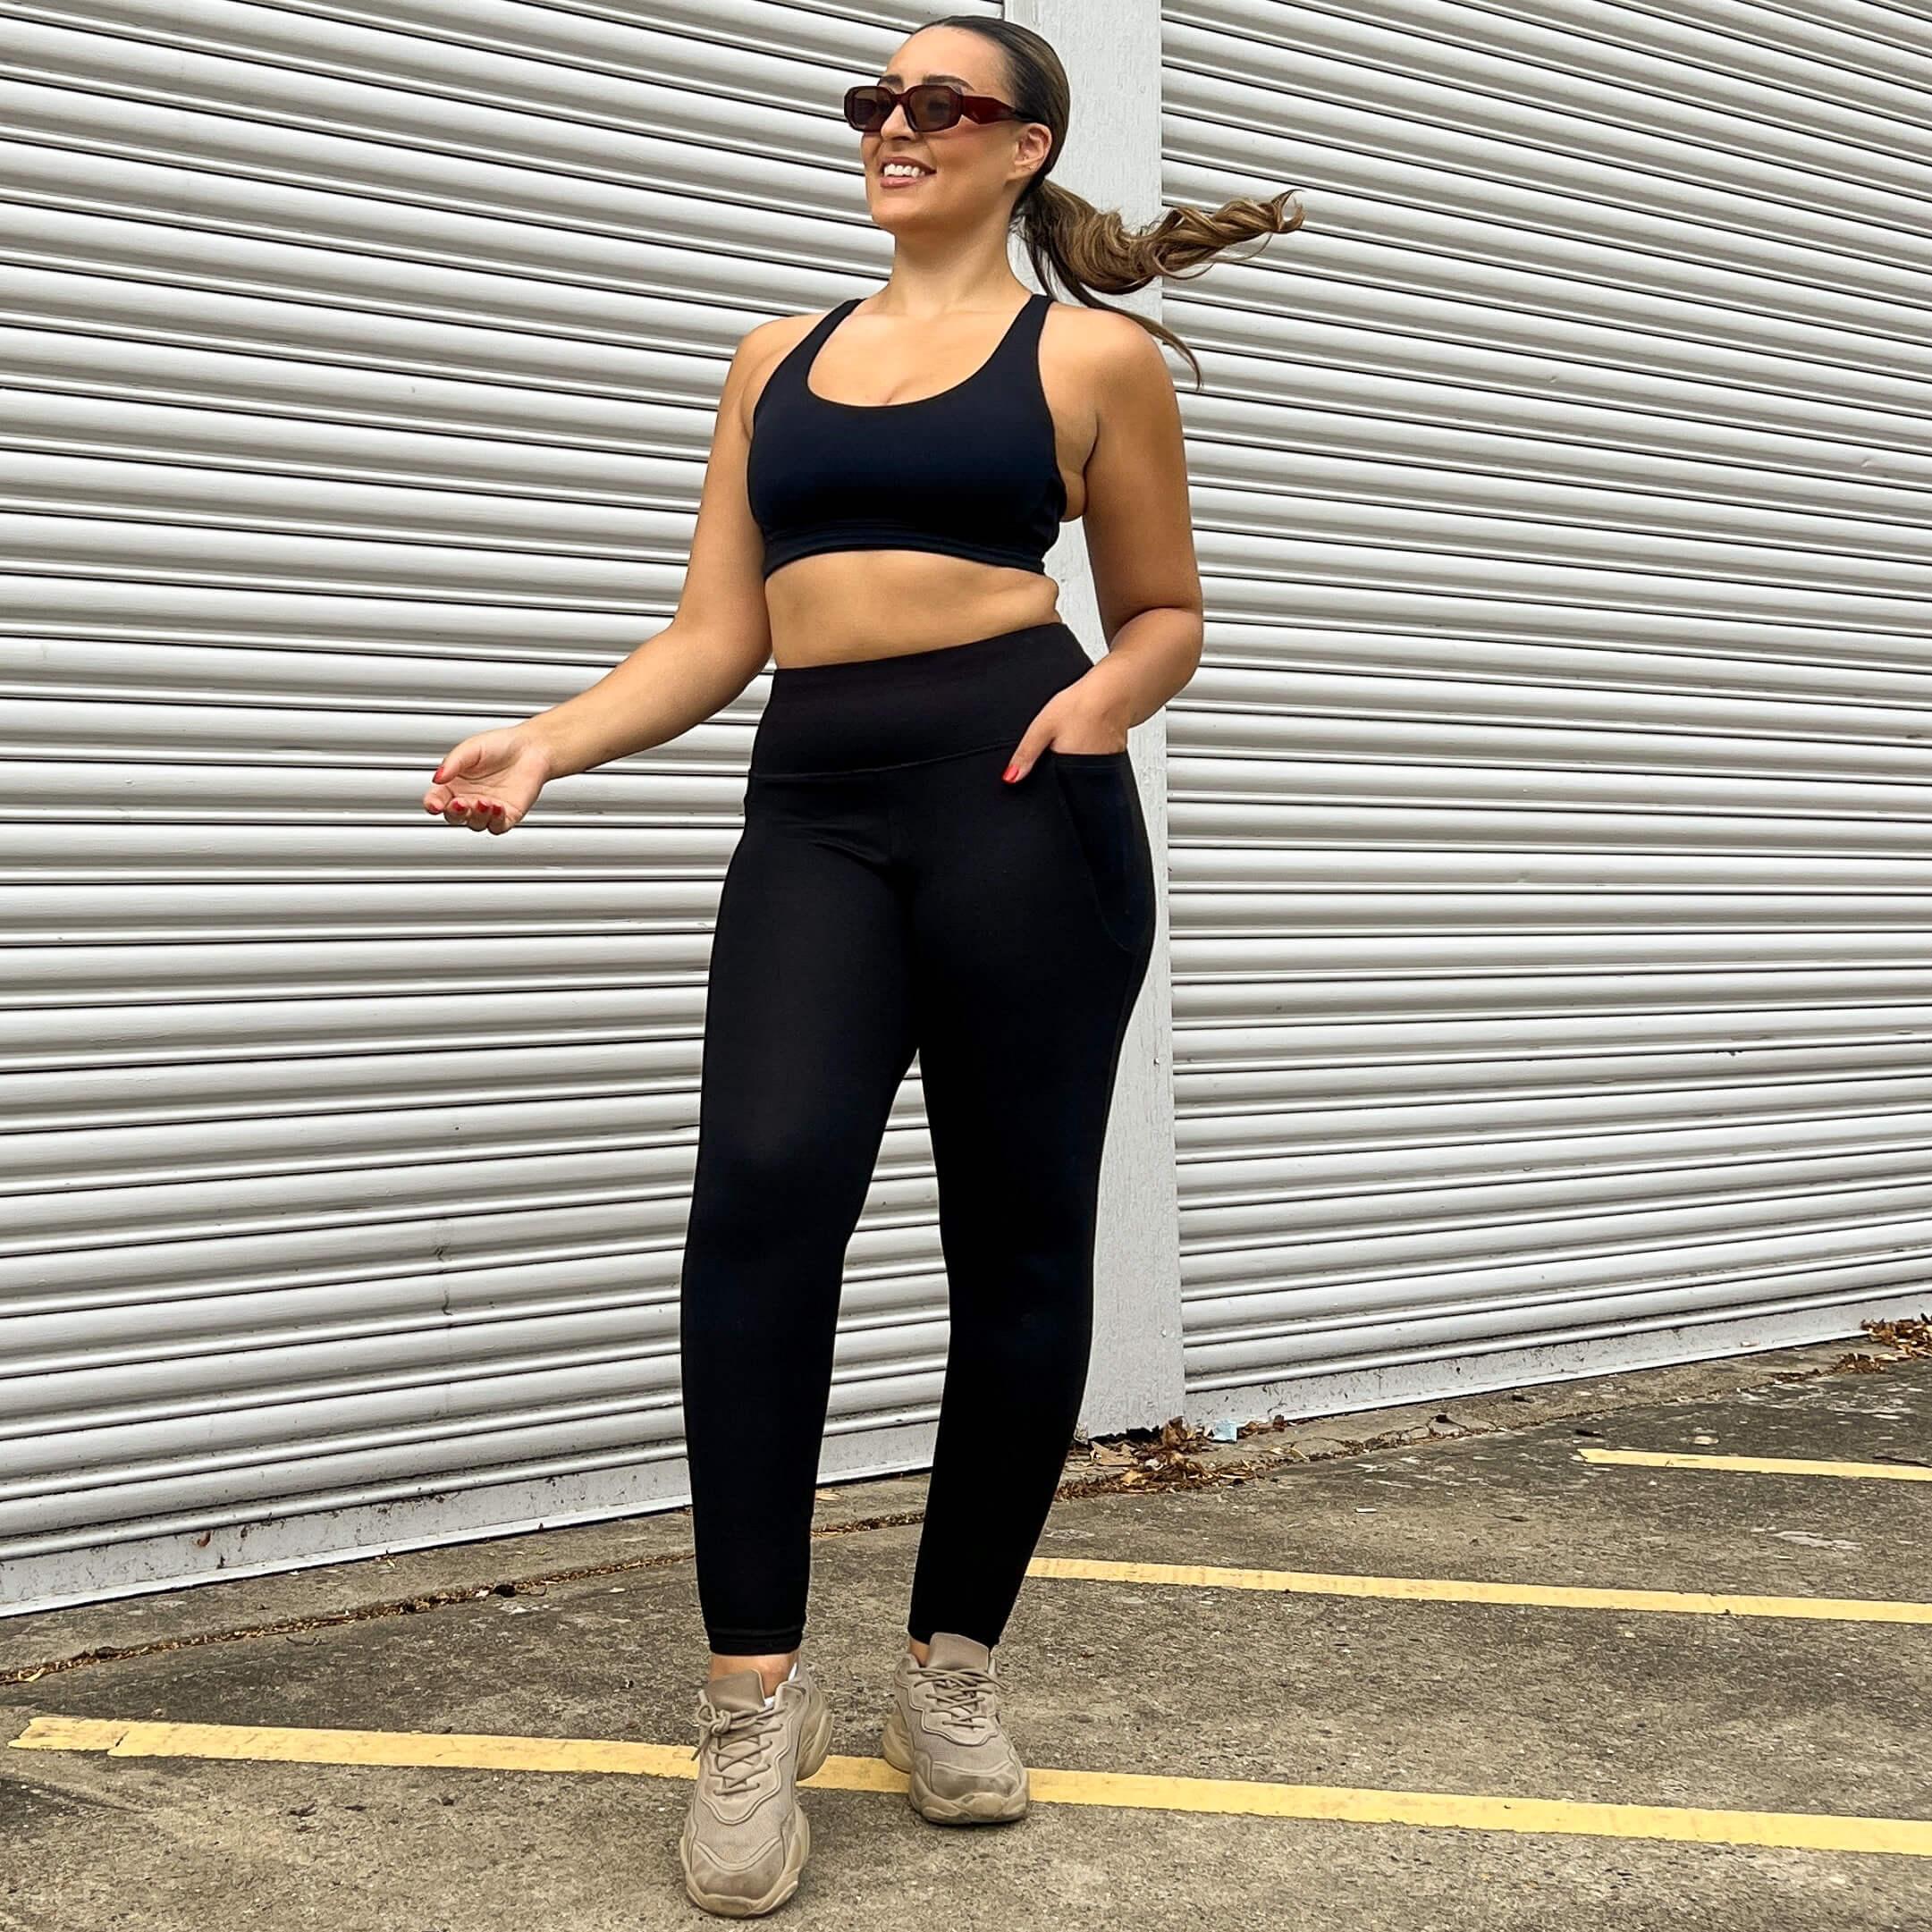 28 Girls Who Make Yoga Pants Look Good  Fitness fashion, Tomboy style  outfits, Fitness girls